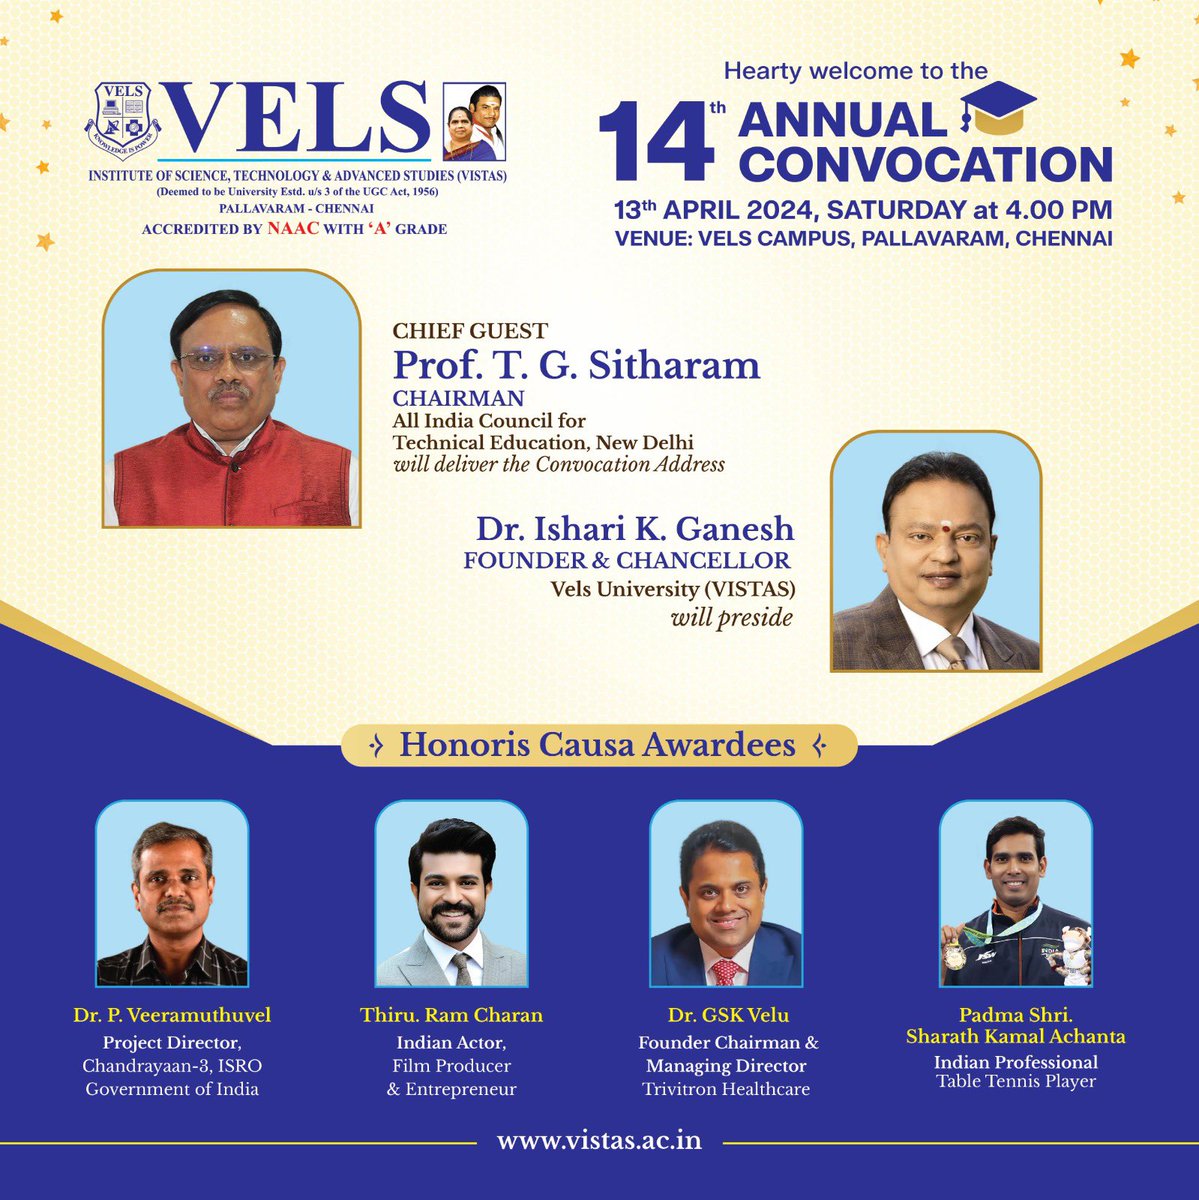 I am happy to inform about VELS University’s esteemed 14th Annual Convocation, happening at the VISTAS Campus on Saturday, 13th April 2024 at 04:00 PM where we will celebrate the outstanding accomplishments of our passing out graduates. Looking forward for an inspiring…